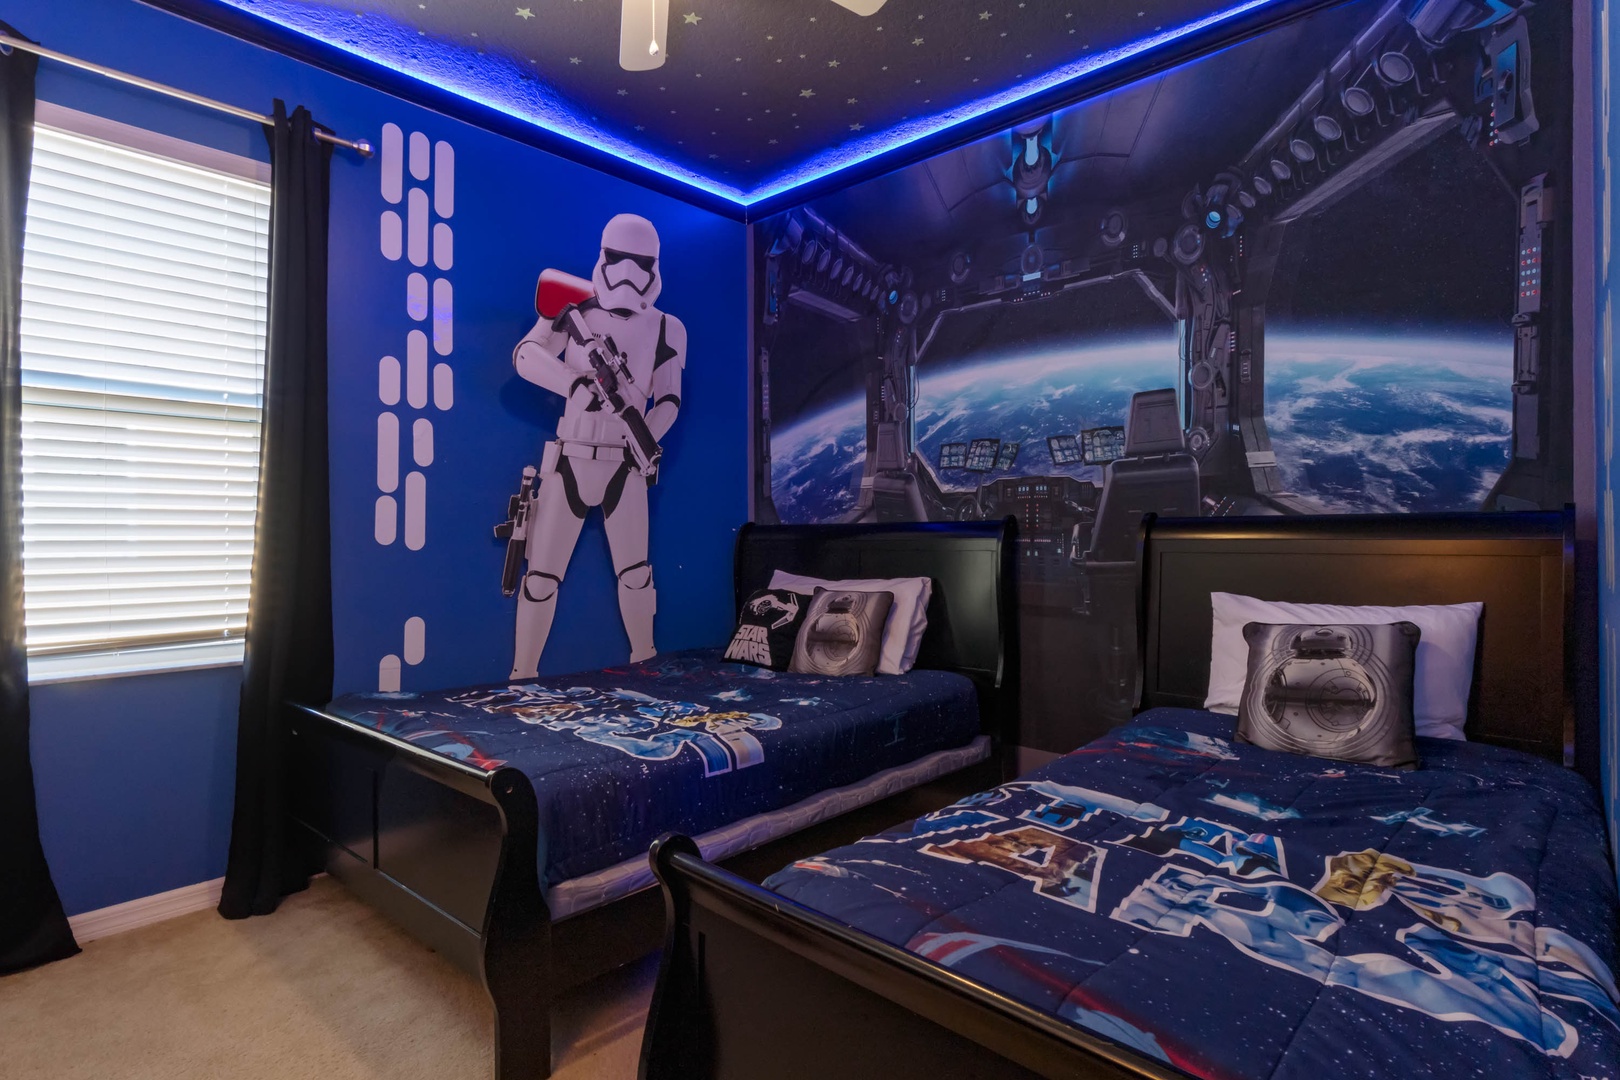 May the force be with you in the Star Wars themed room